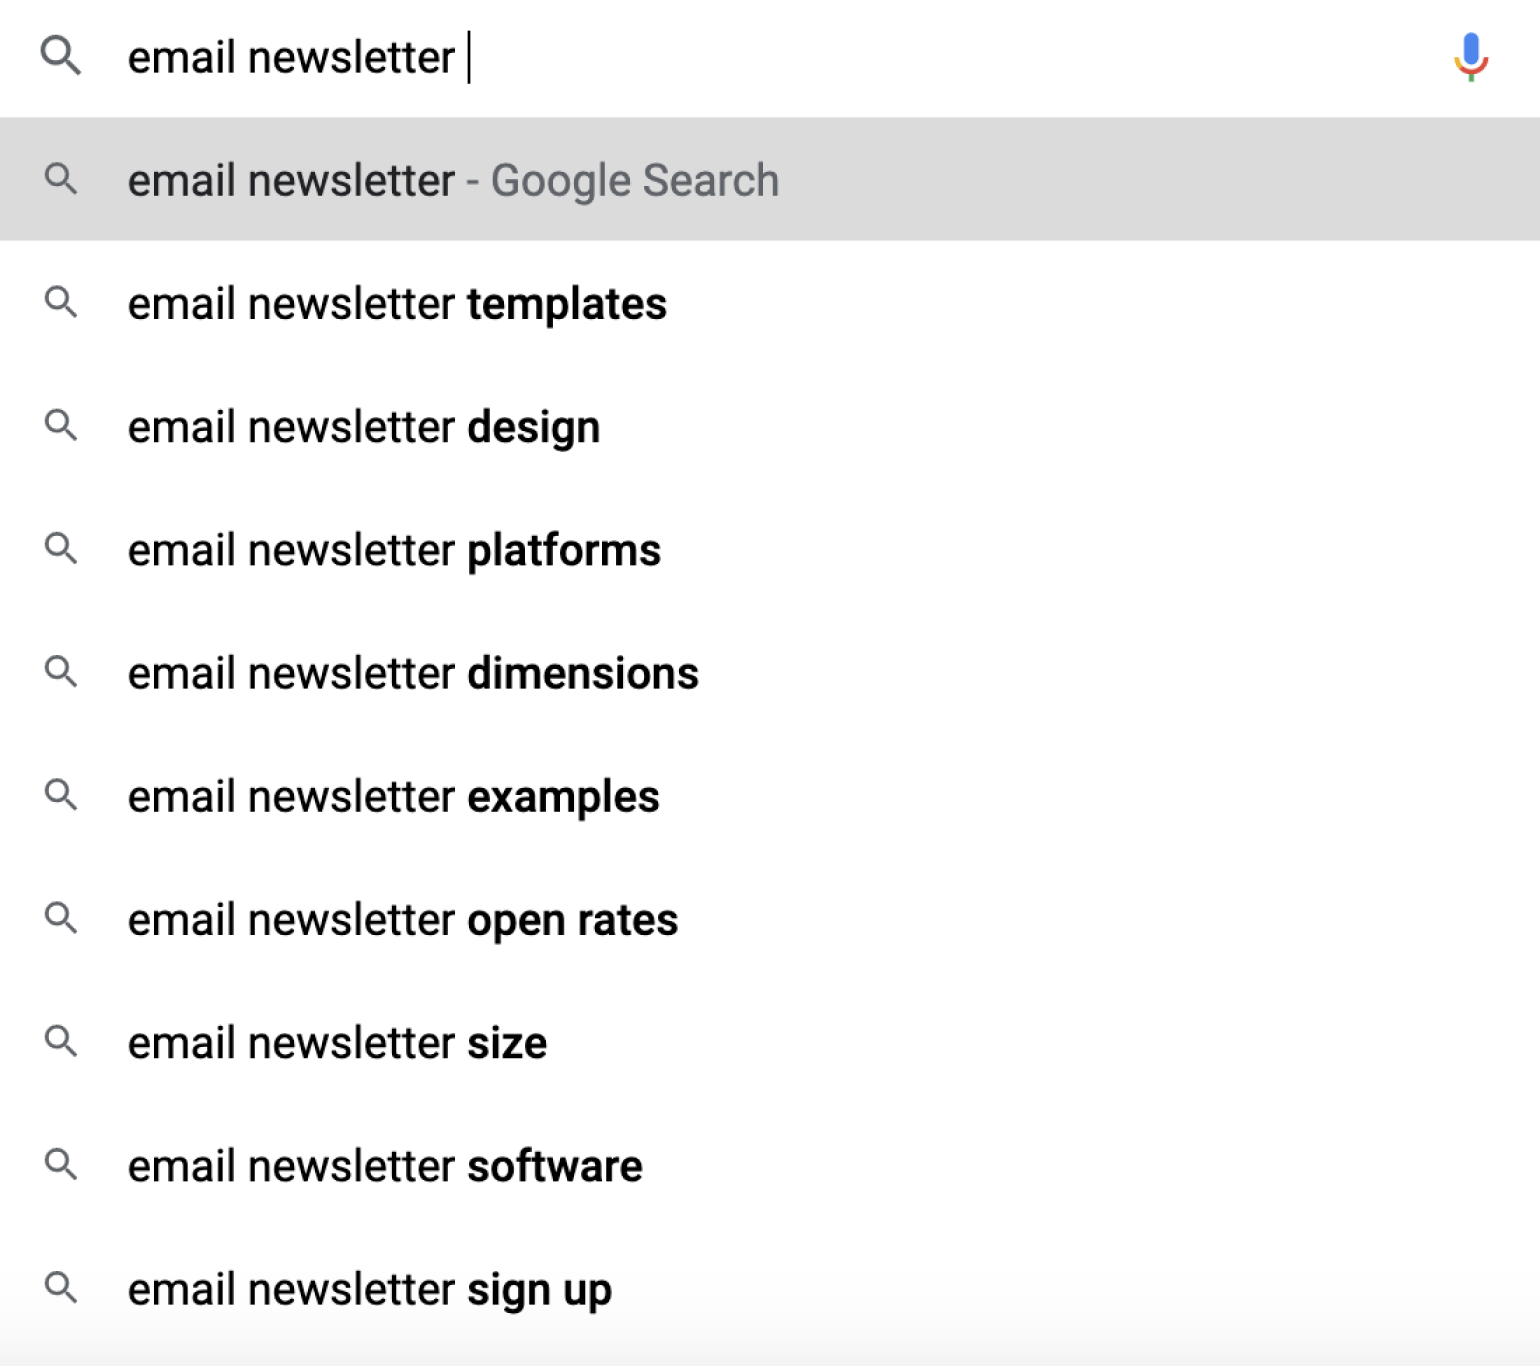 Google autocomplete, listing similar searches to the term 'email newsletter'